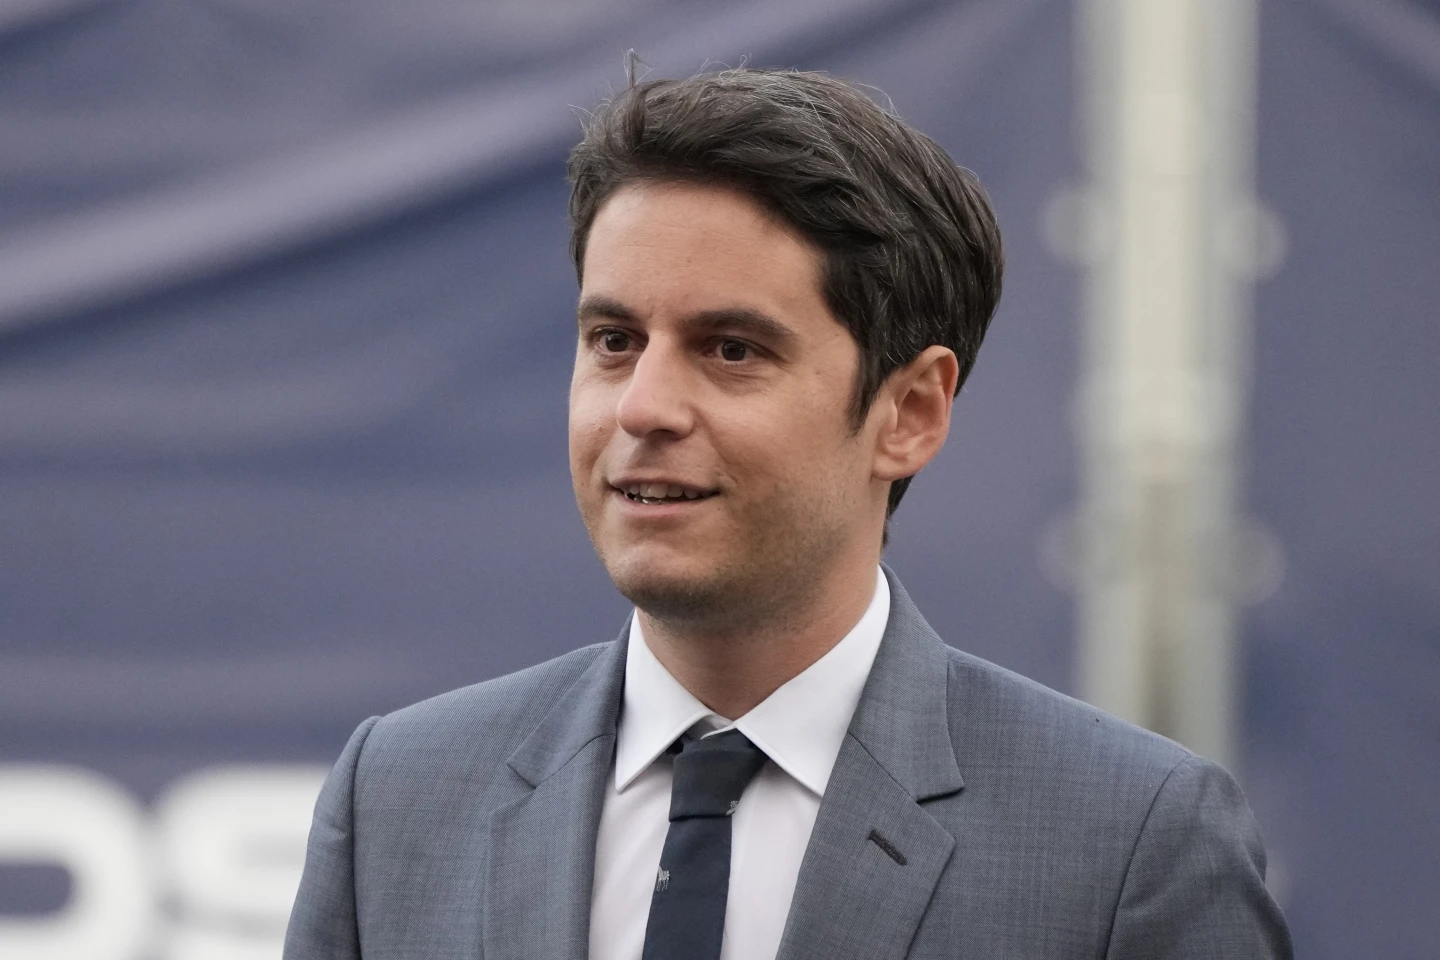 Gabriel Attal is France’s youngest-ever prime minister at age 34 and the first who is openly gay